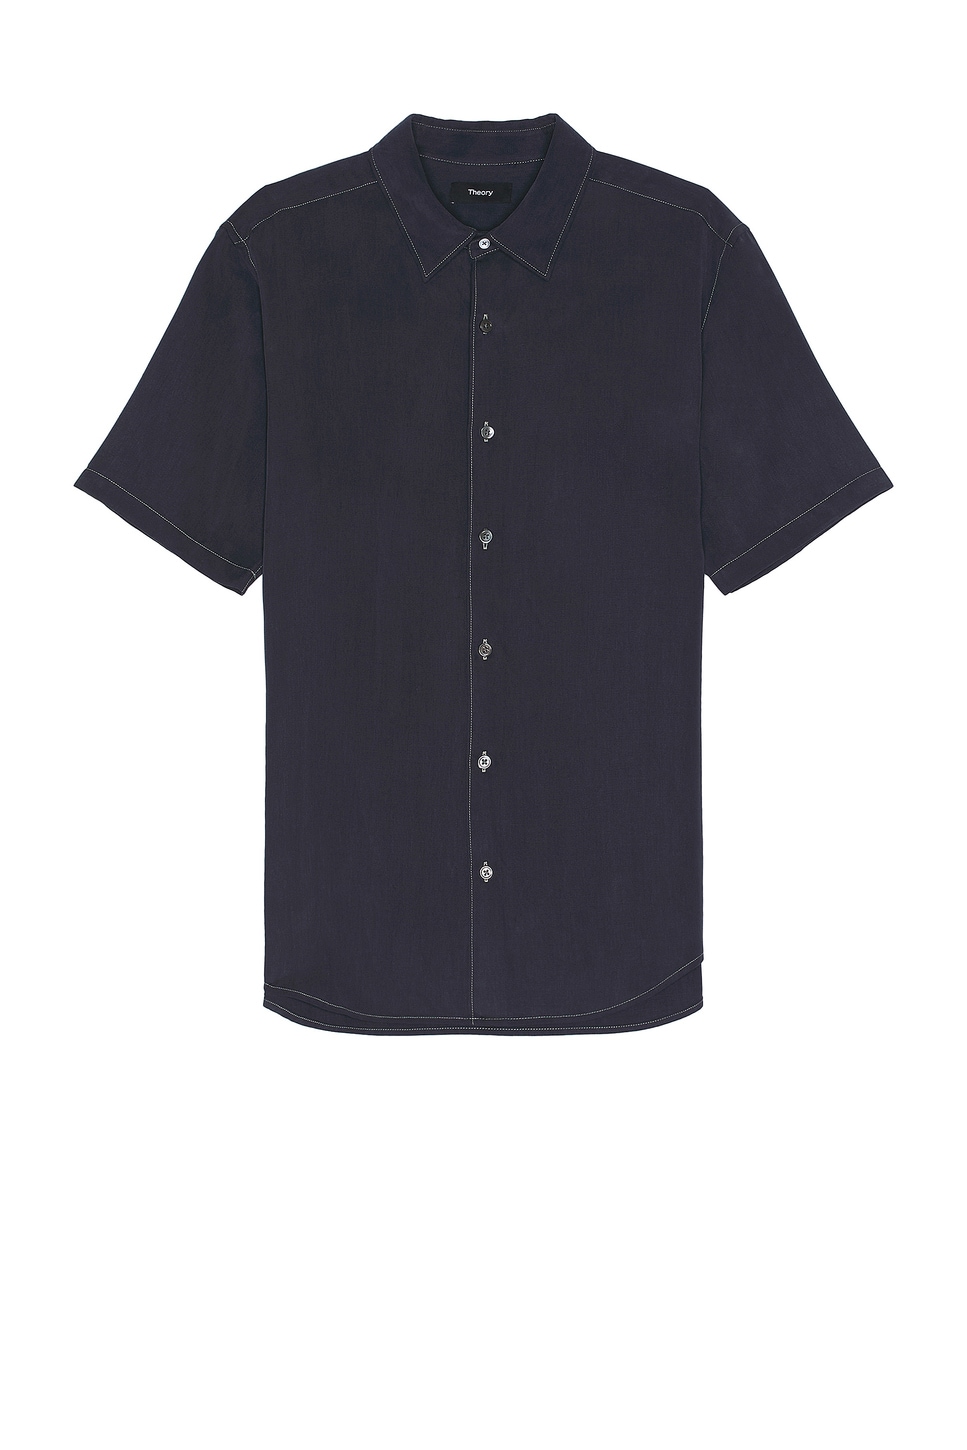 Image 1 of Theory Short Sleeve Shirt in Baltic